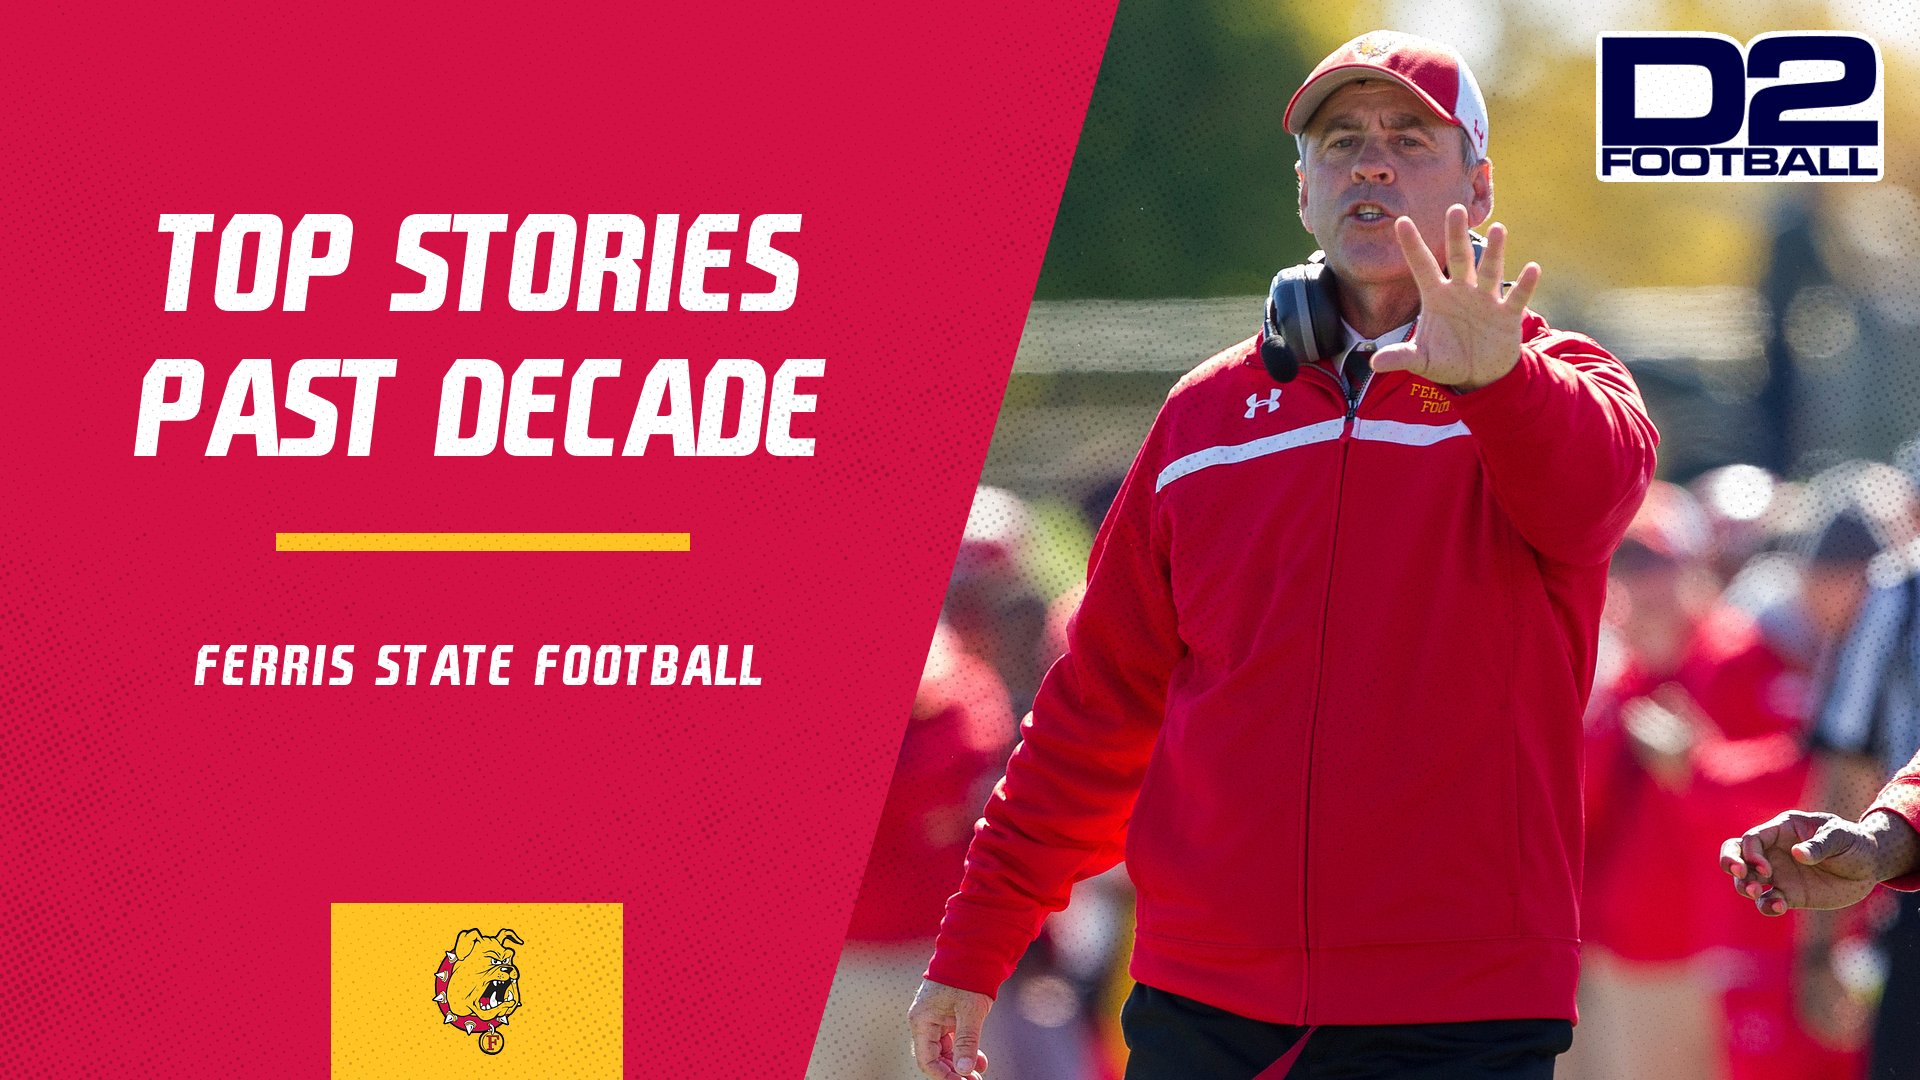 Ferris State's Rise To Top Of GLIAC Tabbed One Of D2Football.com's Top Stories Of Past Decade